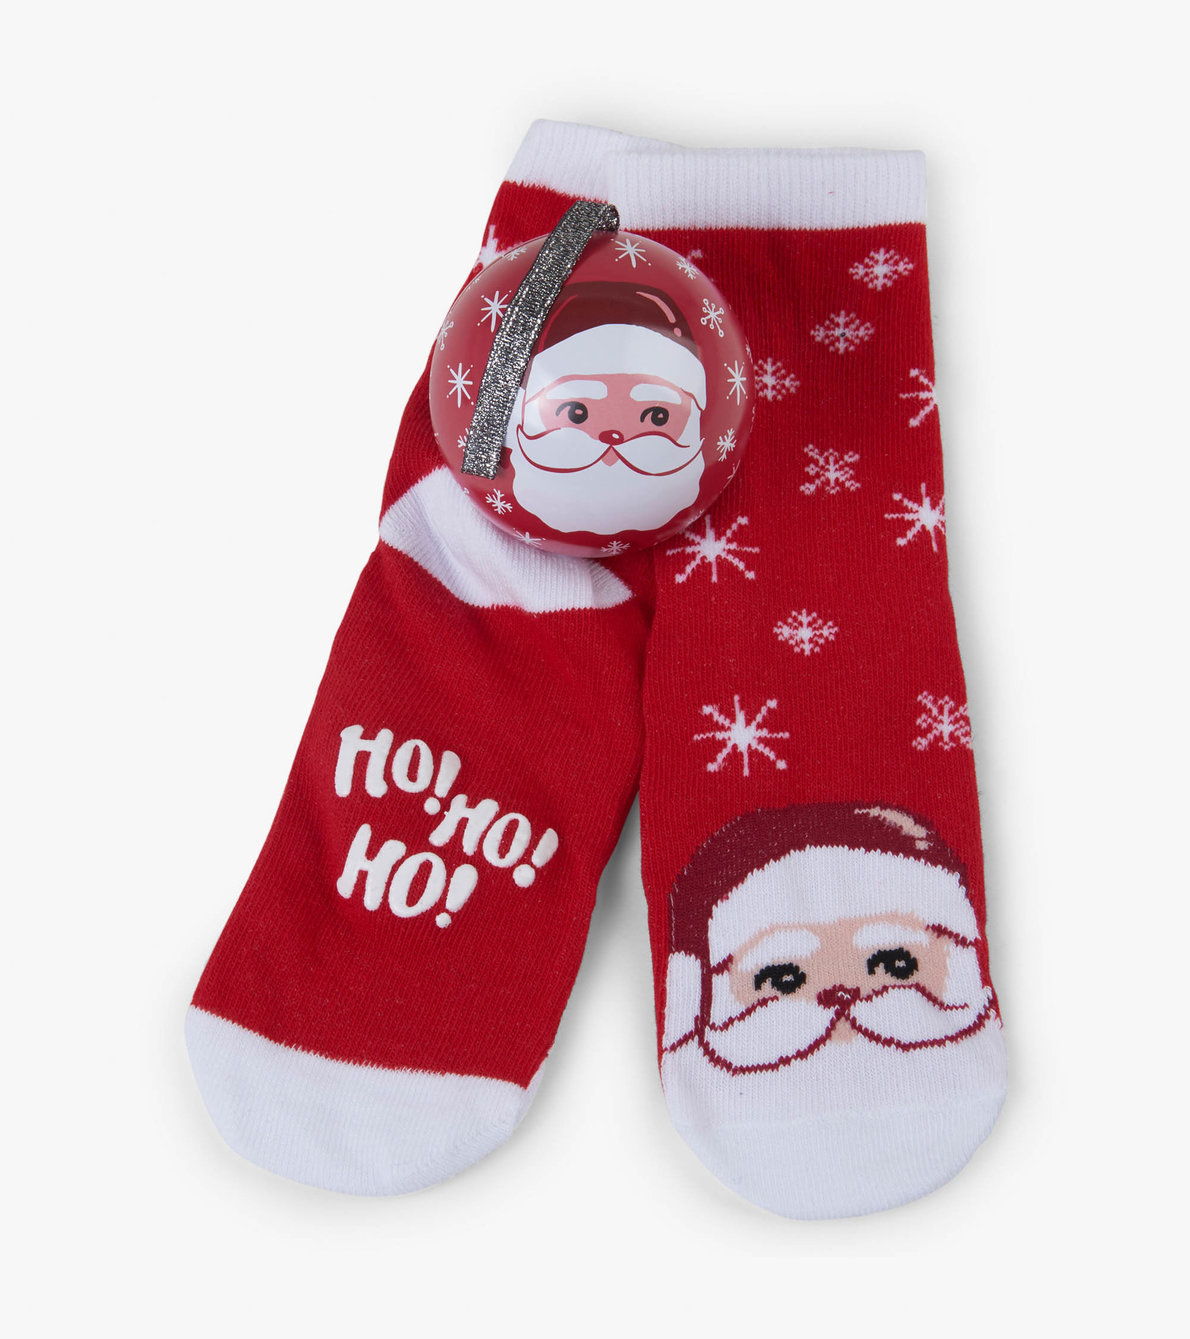 View larger image of Cheerful Claus Kids Socks in Balls